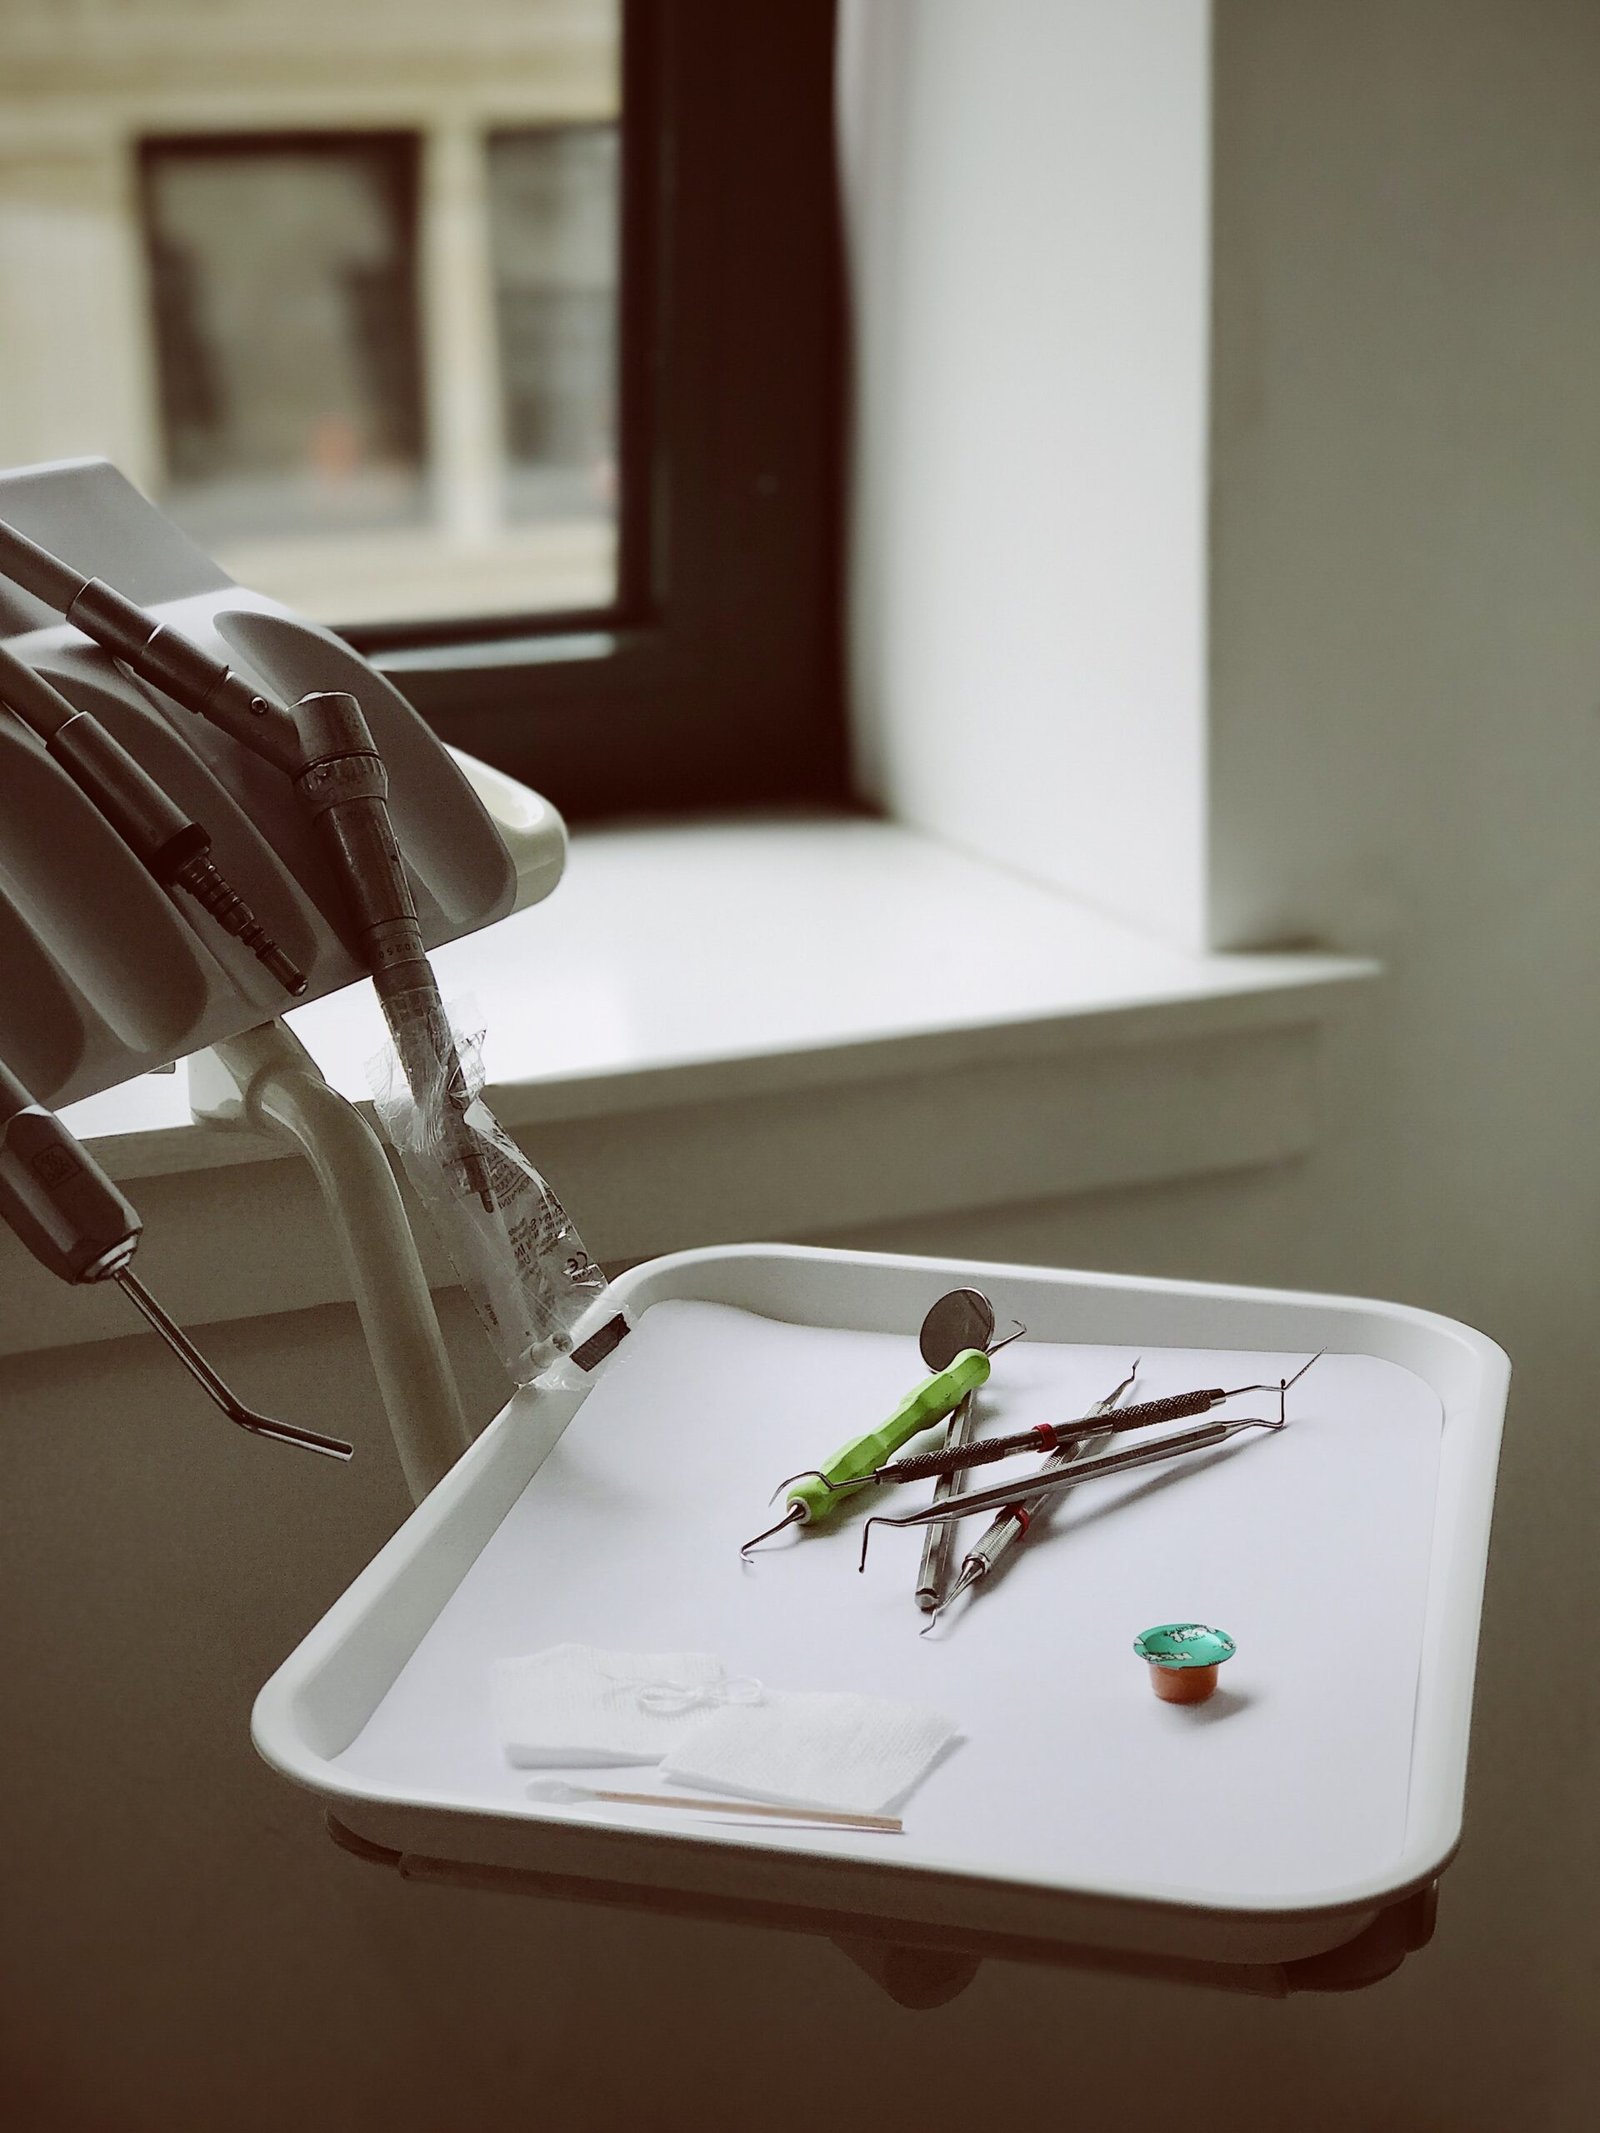 5 Unexpected Benefits of Dental AI 